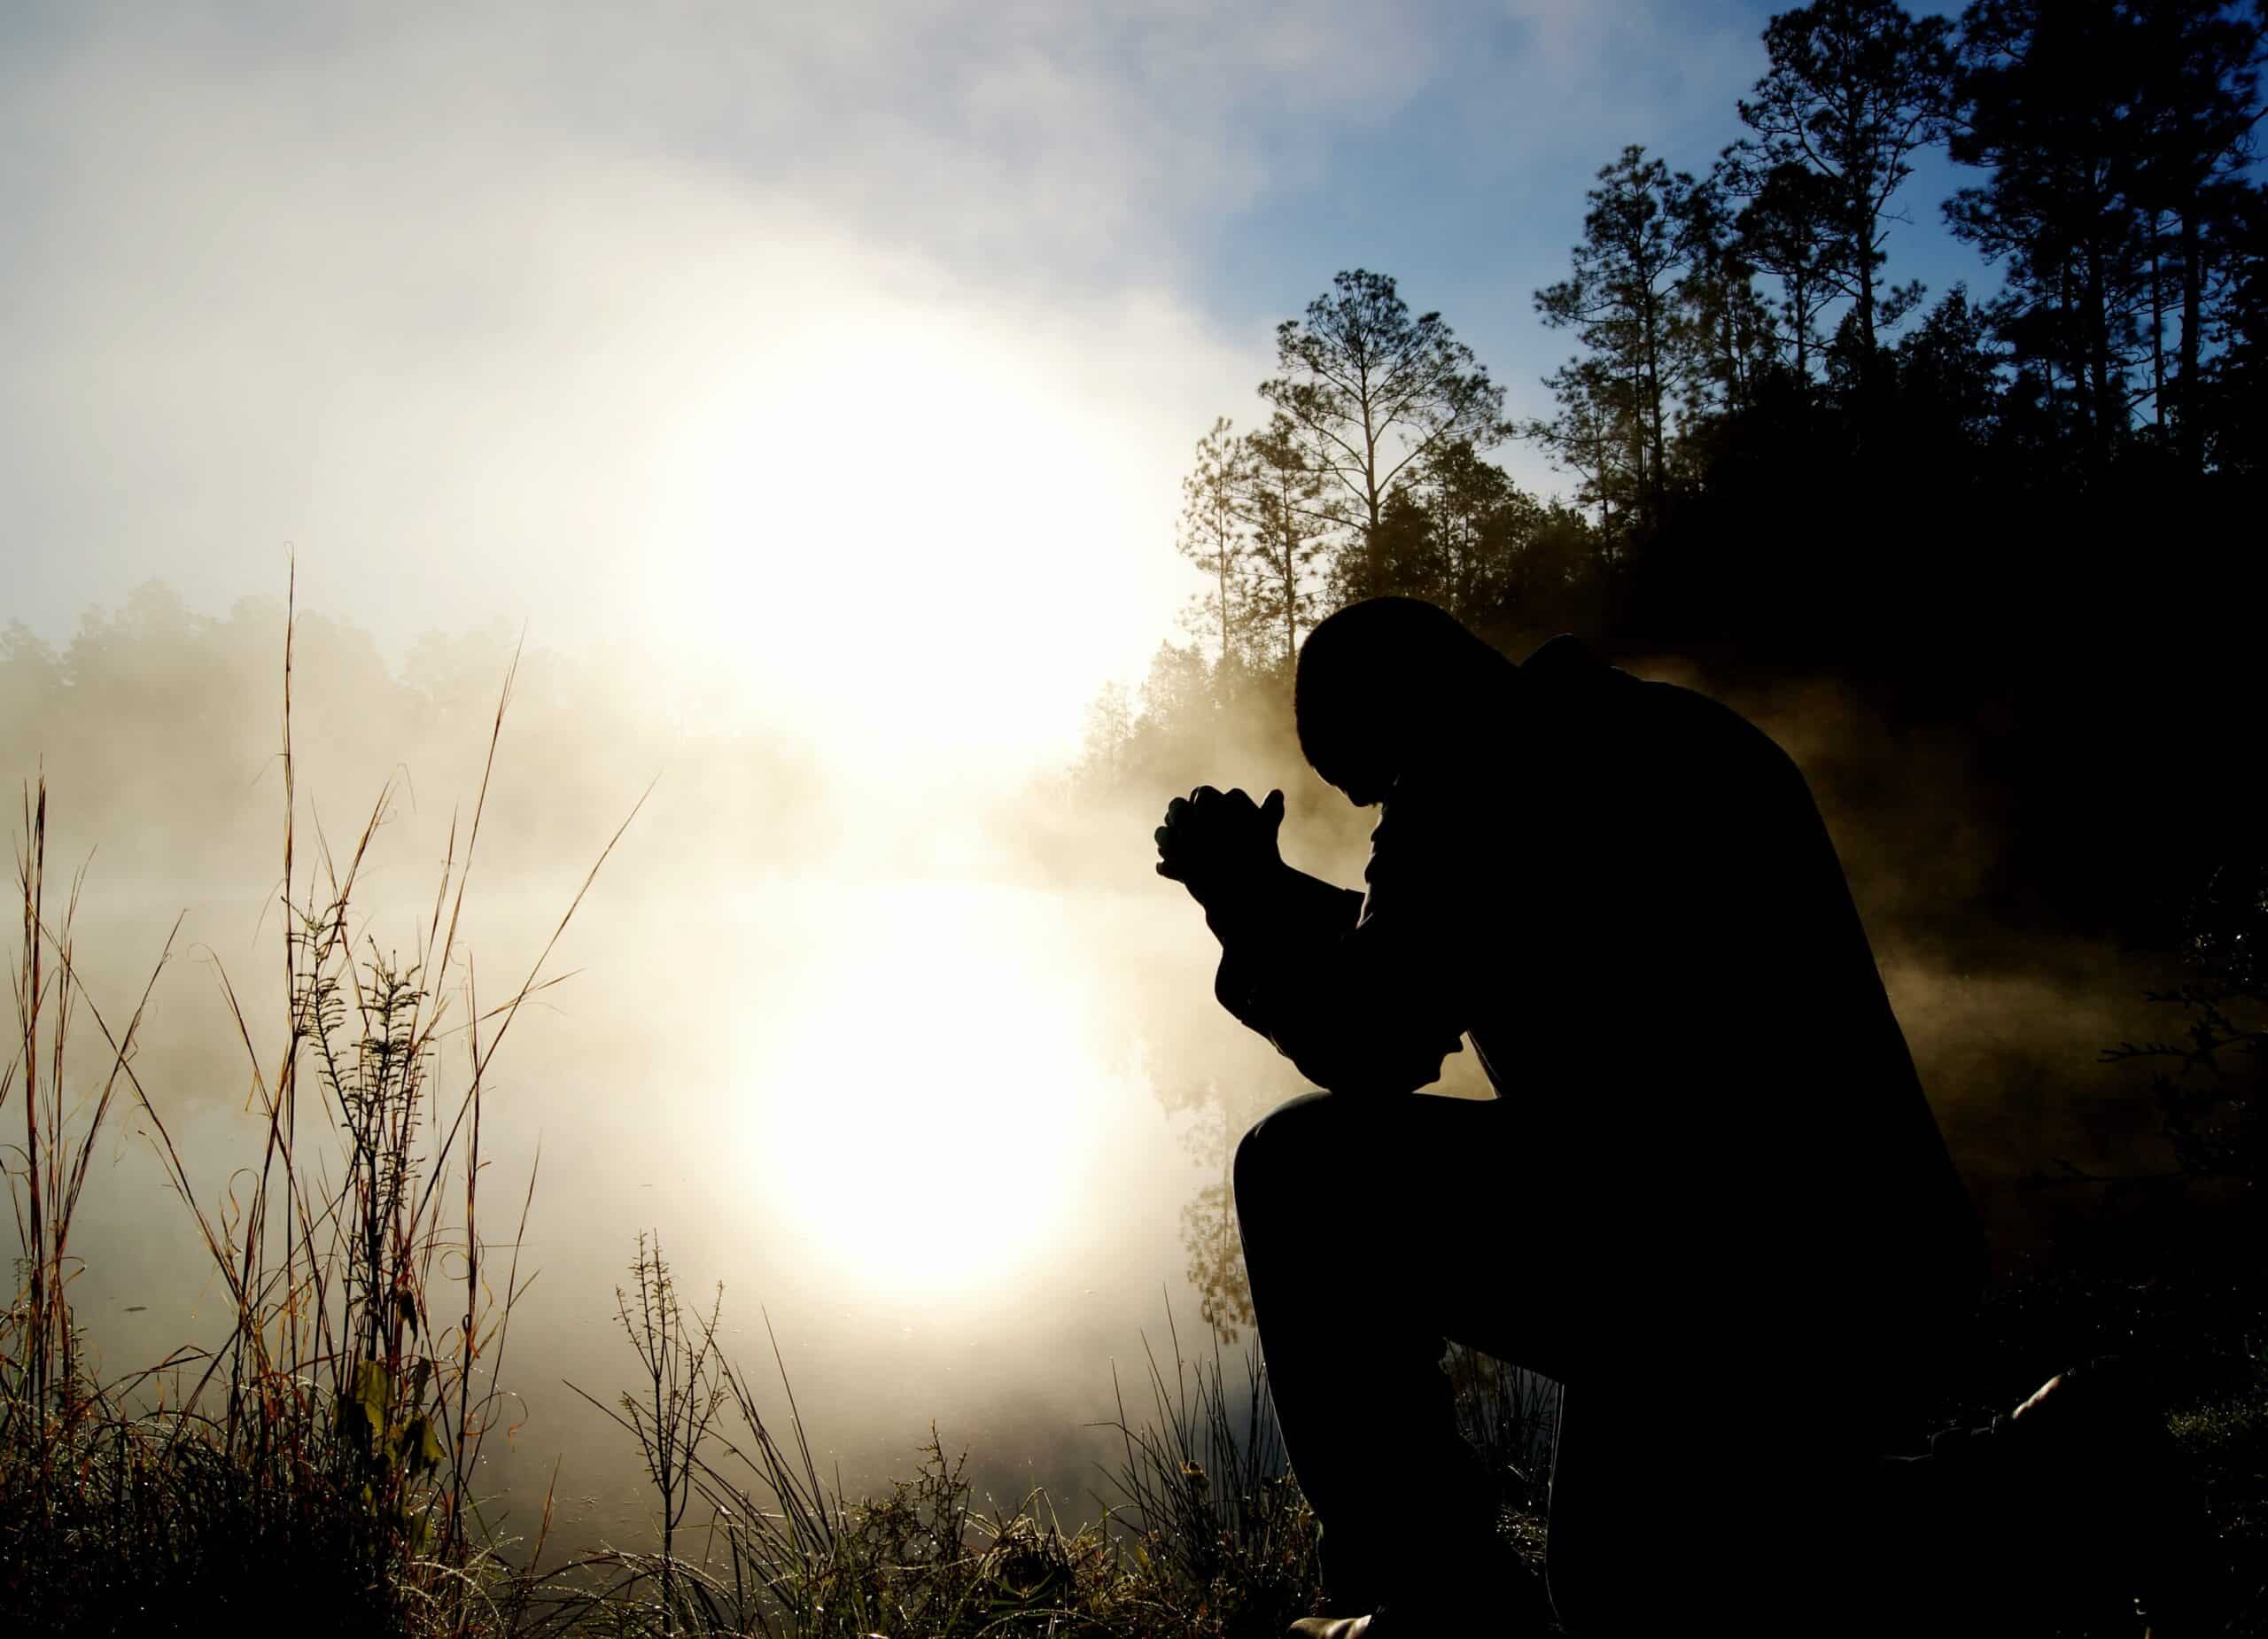 The silhouette of a man is kneeling in prayer in a field by a pond lit by sunlight. Demons Still Flee at the Mention of Jesus’ Name